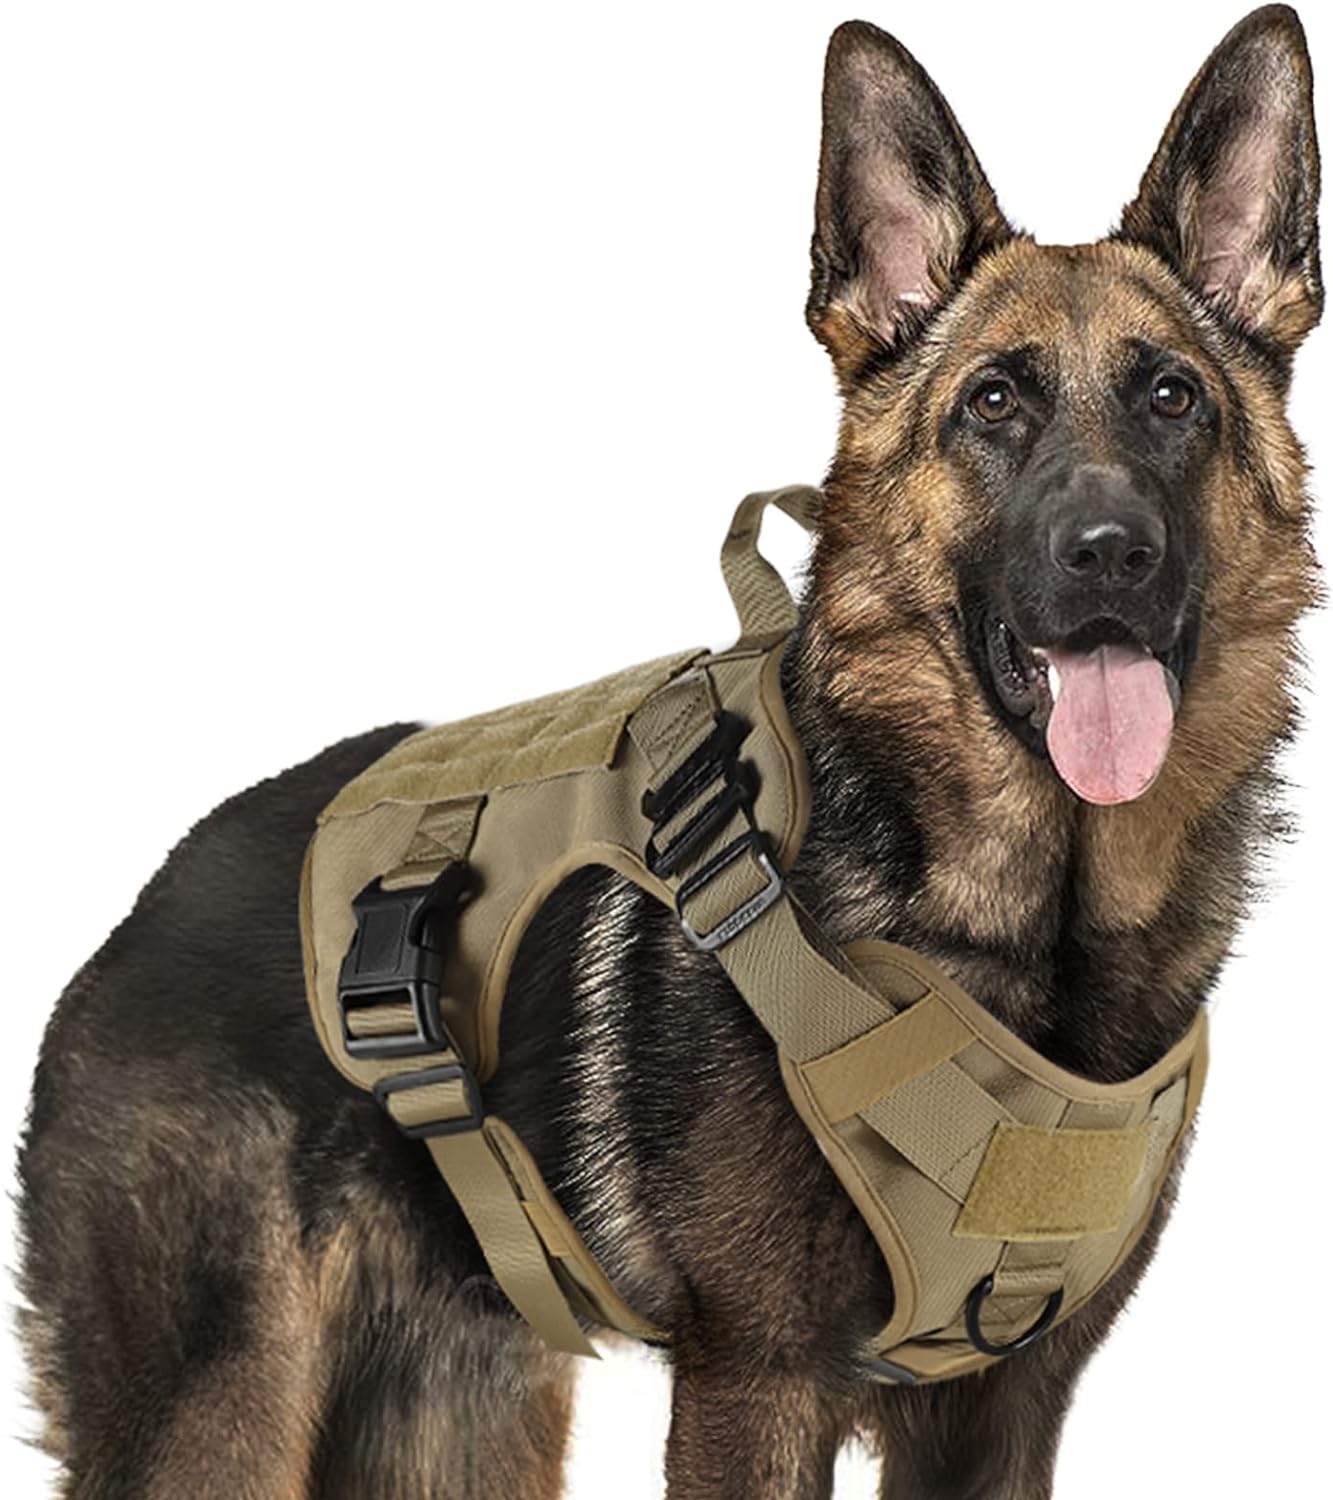 rabbitgoo Tactical Dog Harness for Large Dogs, Heavy Duty Dog Harness with Handle, No-Pull Service Dog Vest Large Breed, Adjustable Military Dog Vest Harness for Training Hunting Walking, Brown, M